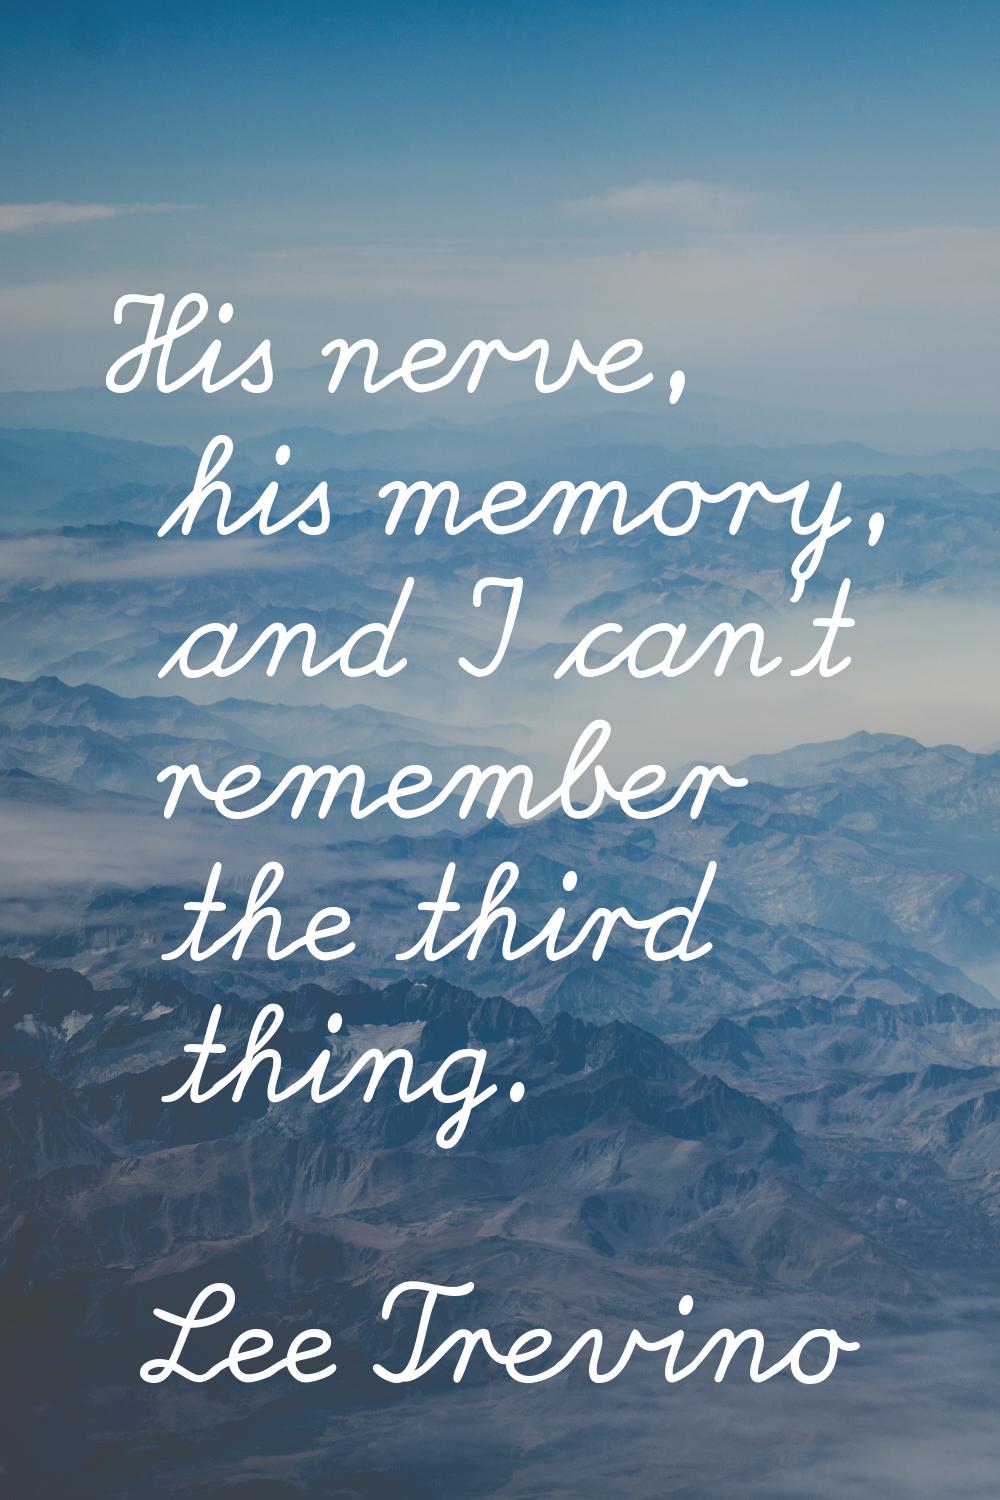 His nerve, his memory, and I can't remember the third thing.